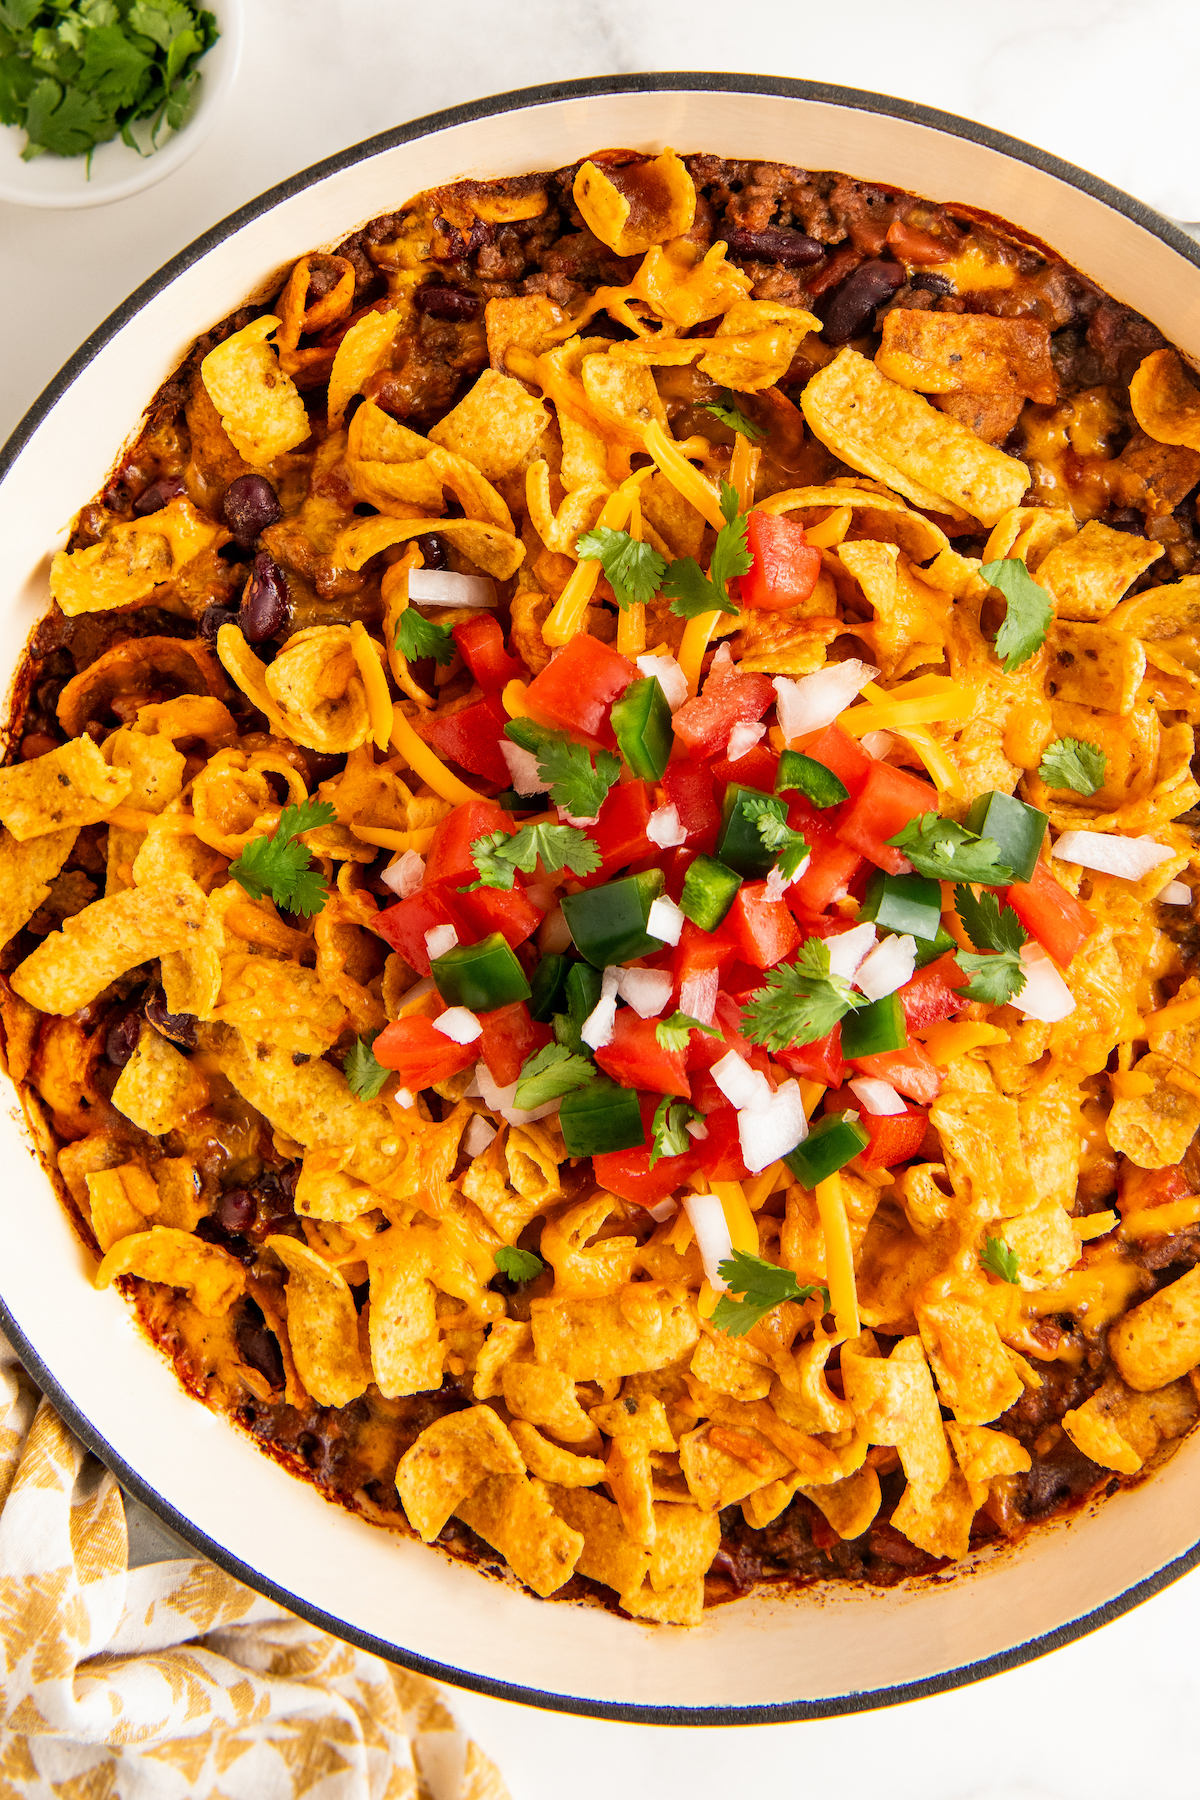 Hearty and beefy Frito pie with lots of melty cheese in a skillet.